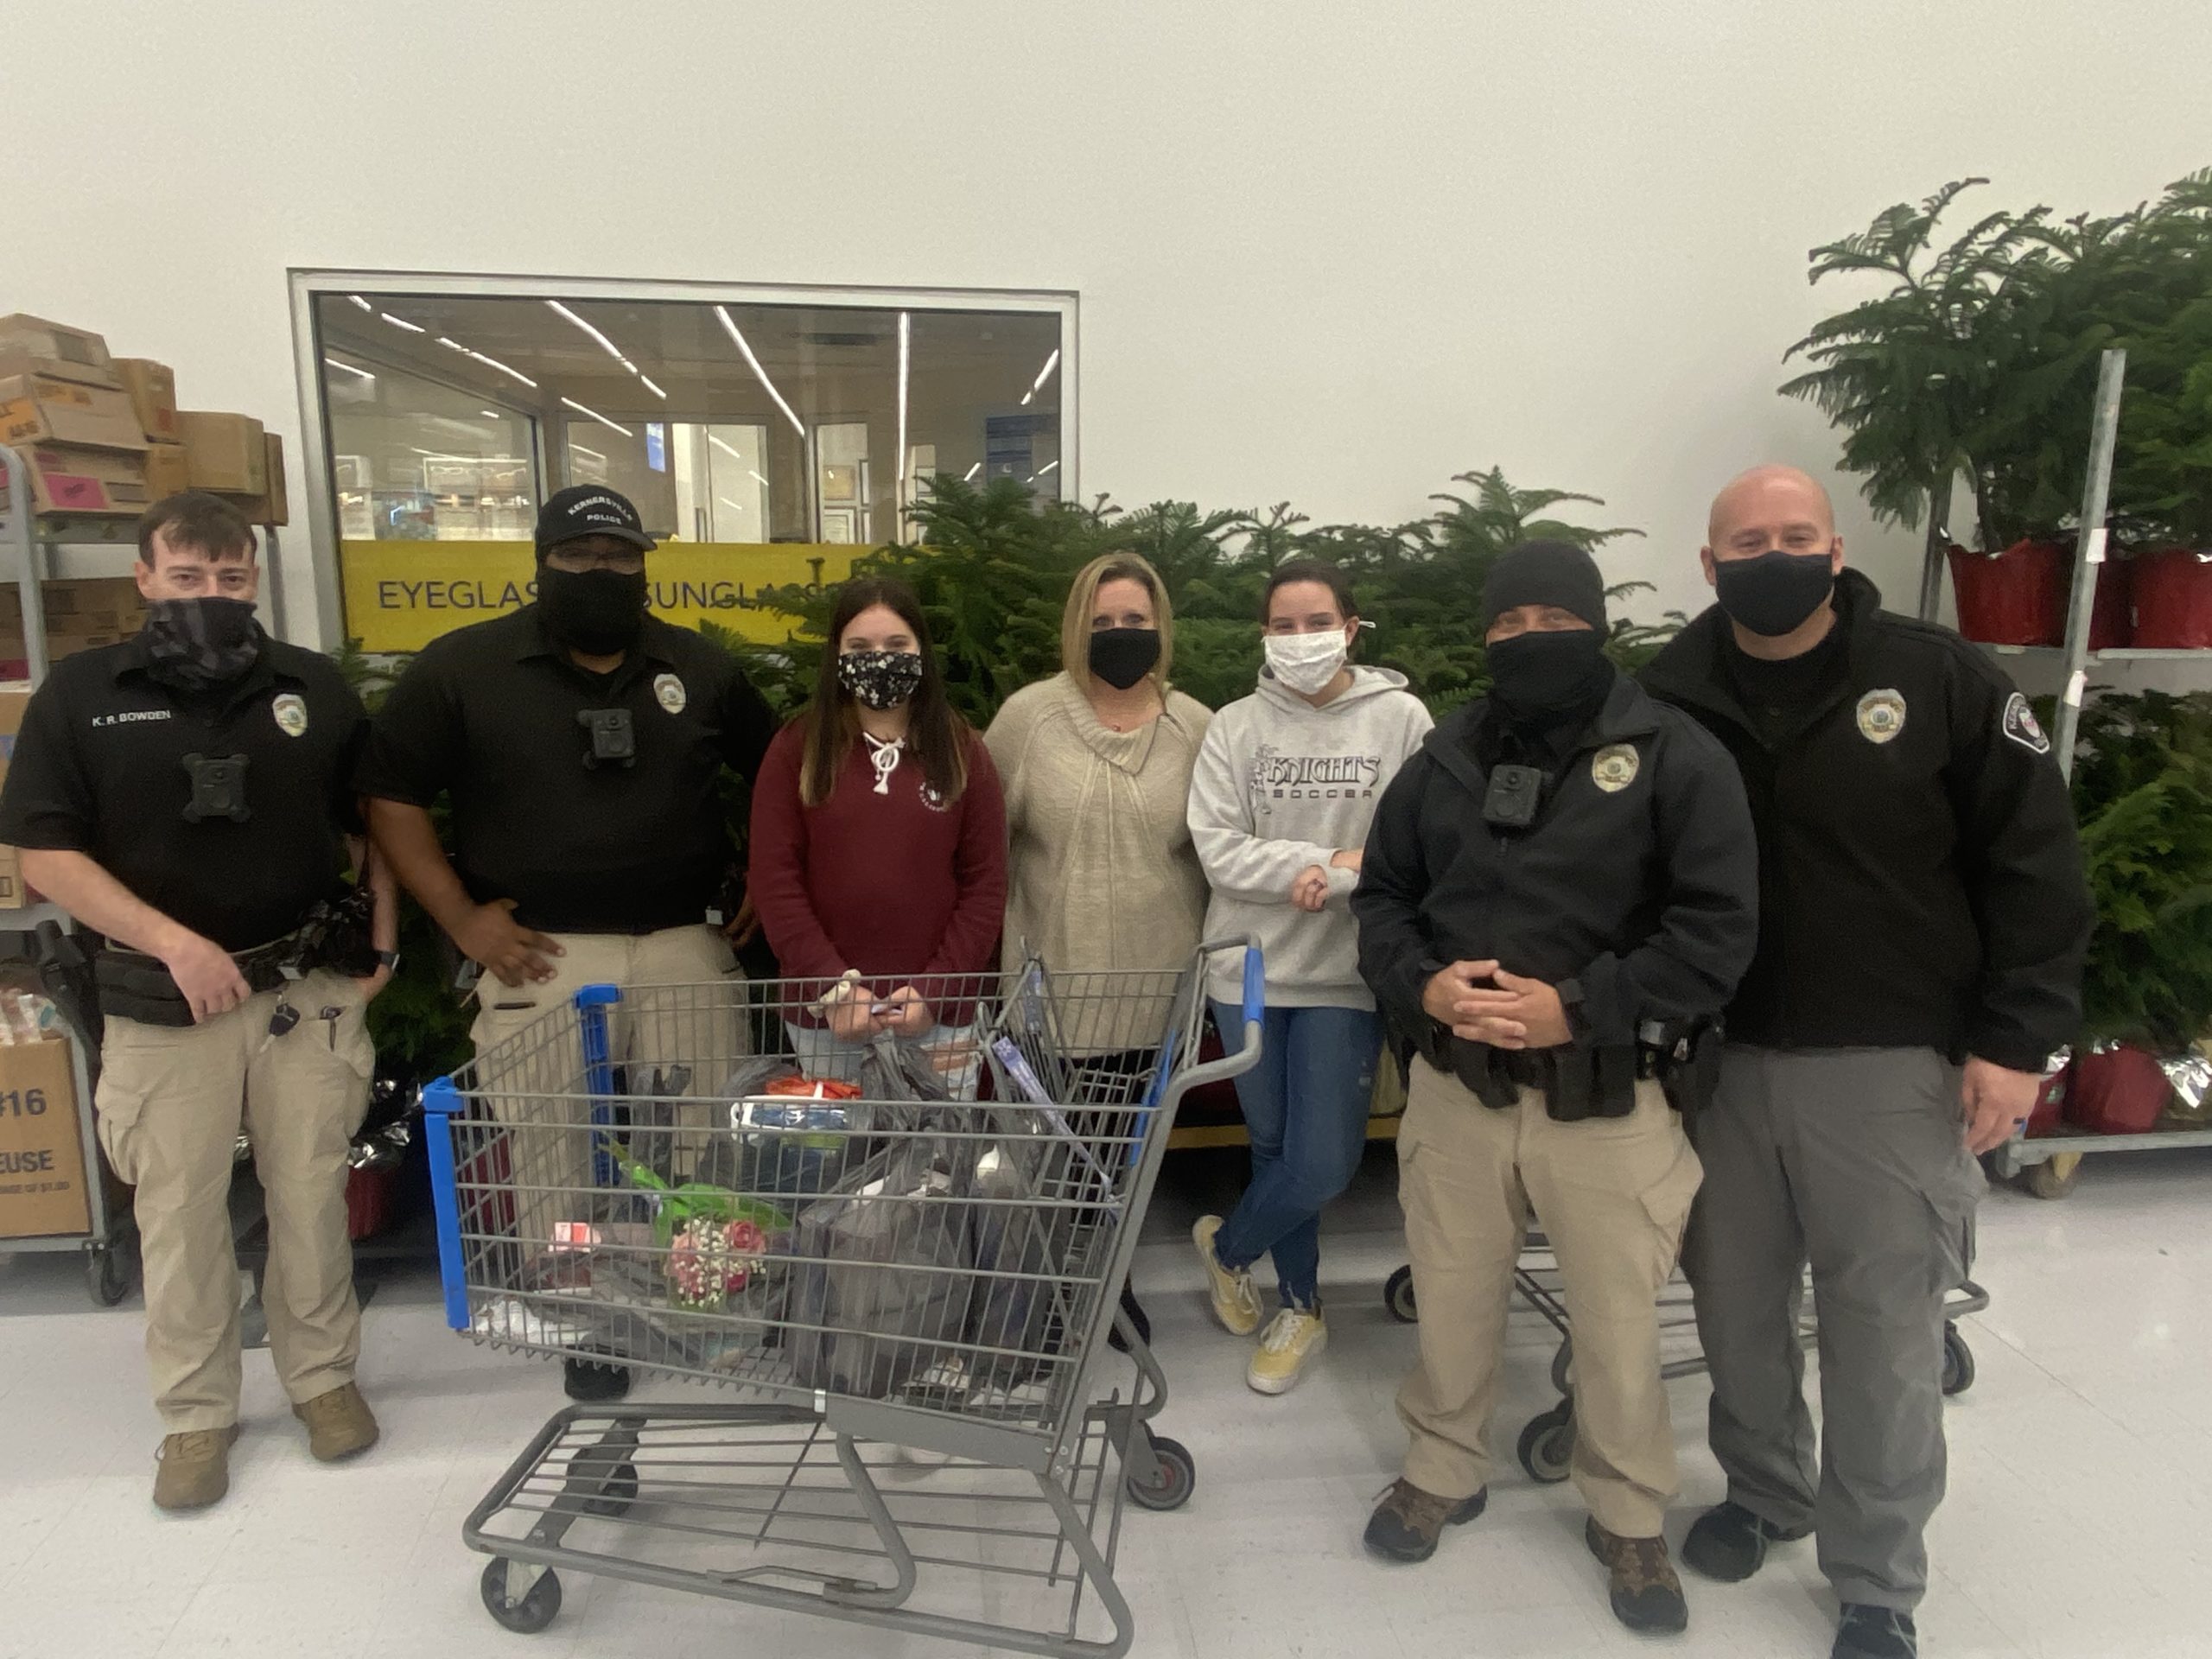 Kernersville police officers participating in civic activities